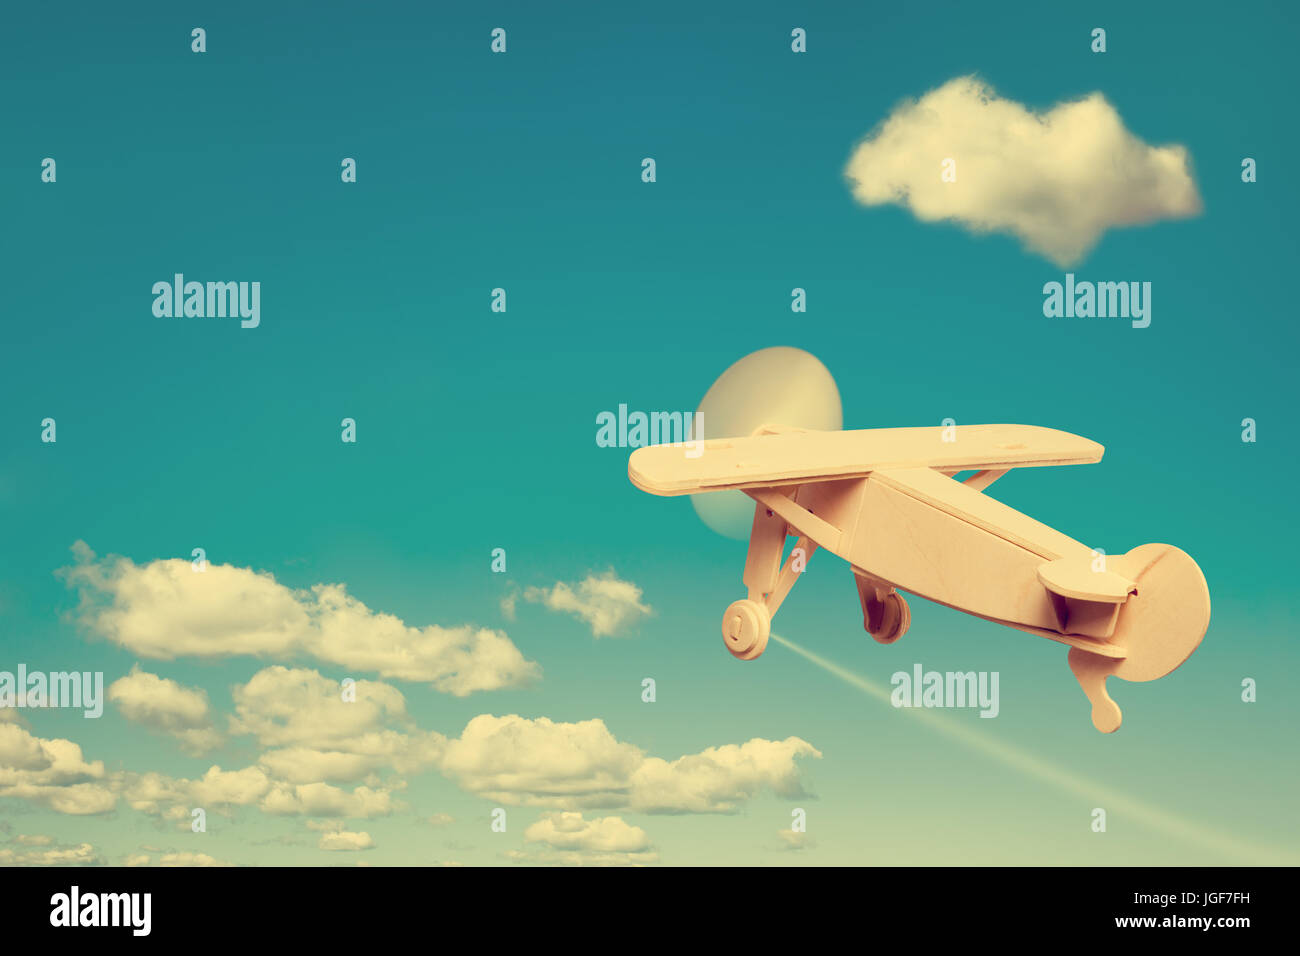 Wooden plane flying in the sky, with space for text. Stock Photo